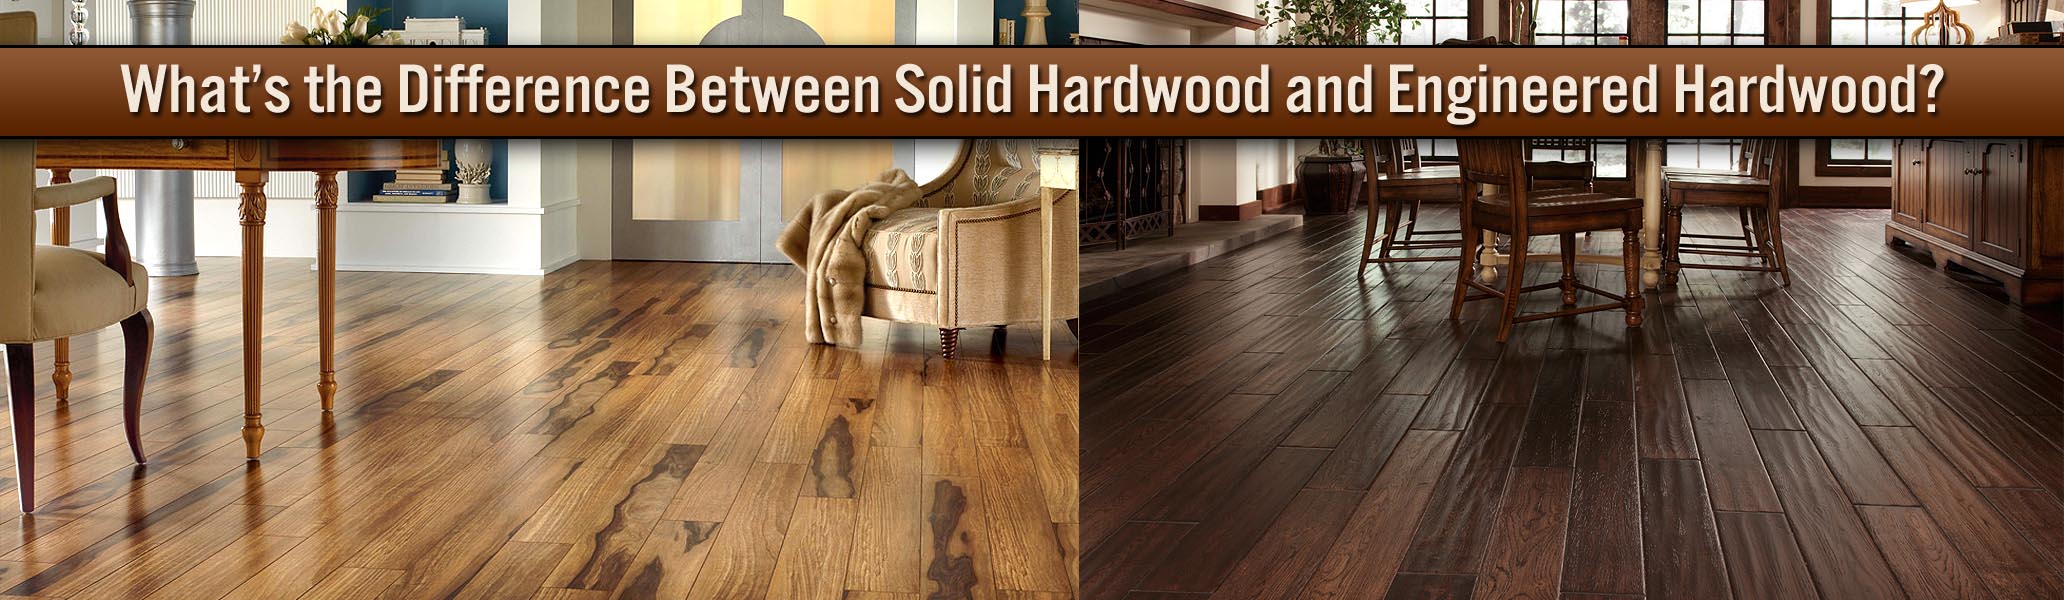 what is the difference between solid hardwood and engineered hardwood